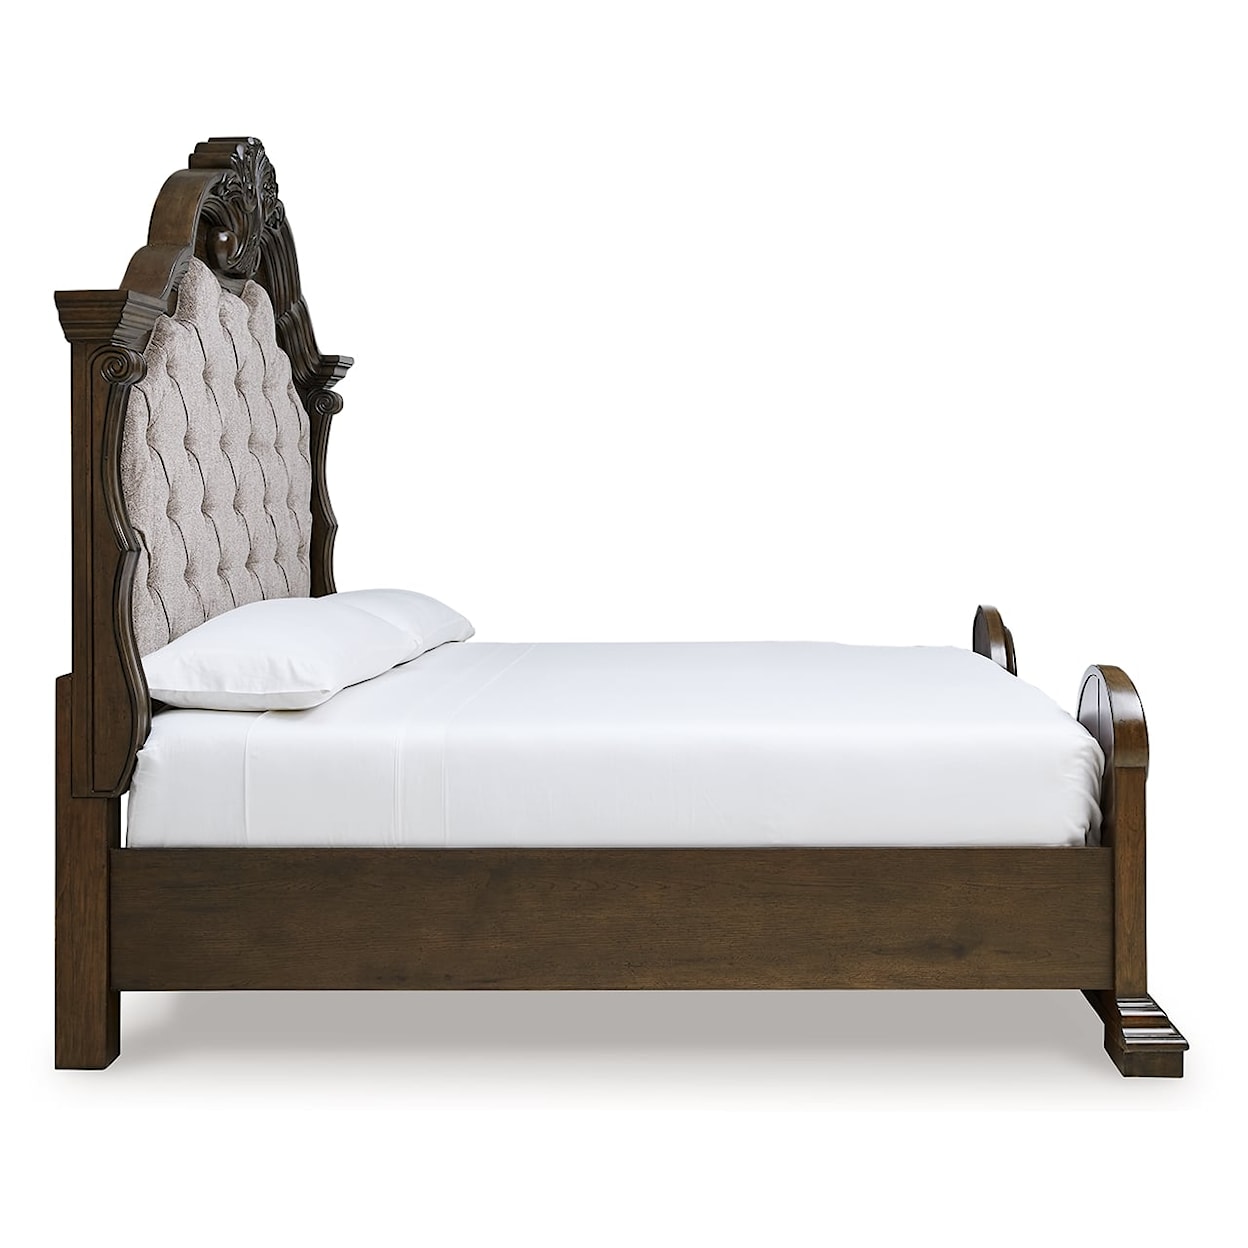 Ashley Signature Design Maylee Queen Upholstered Bed